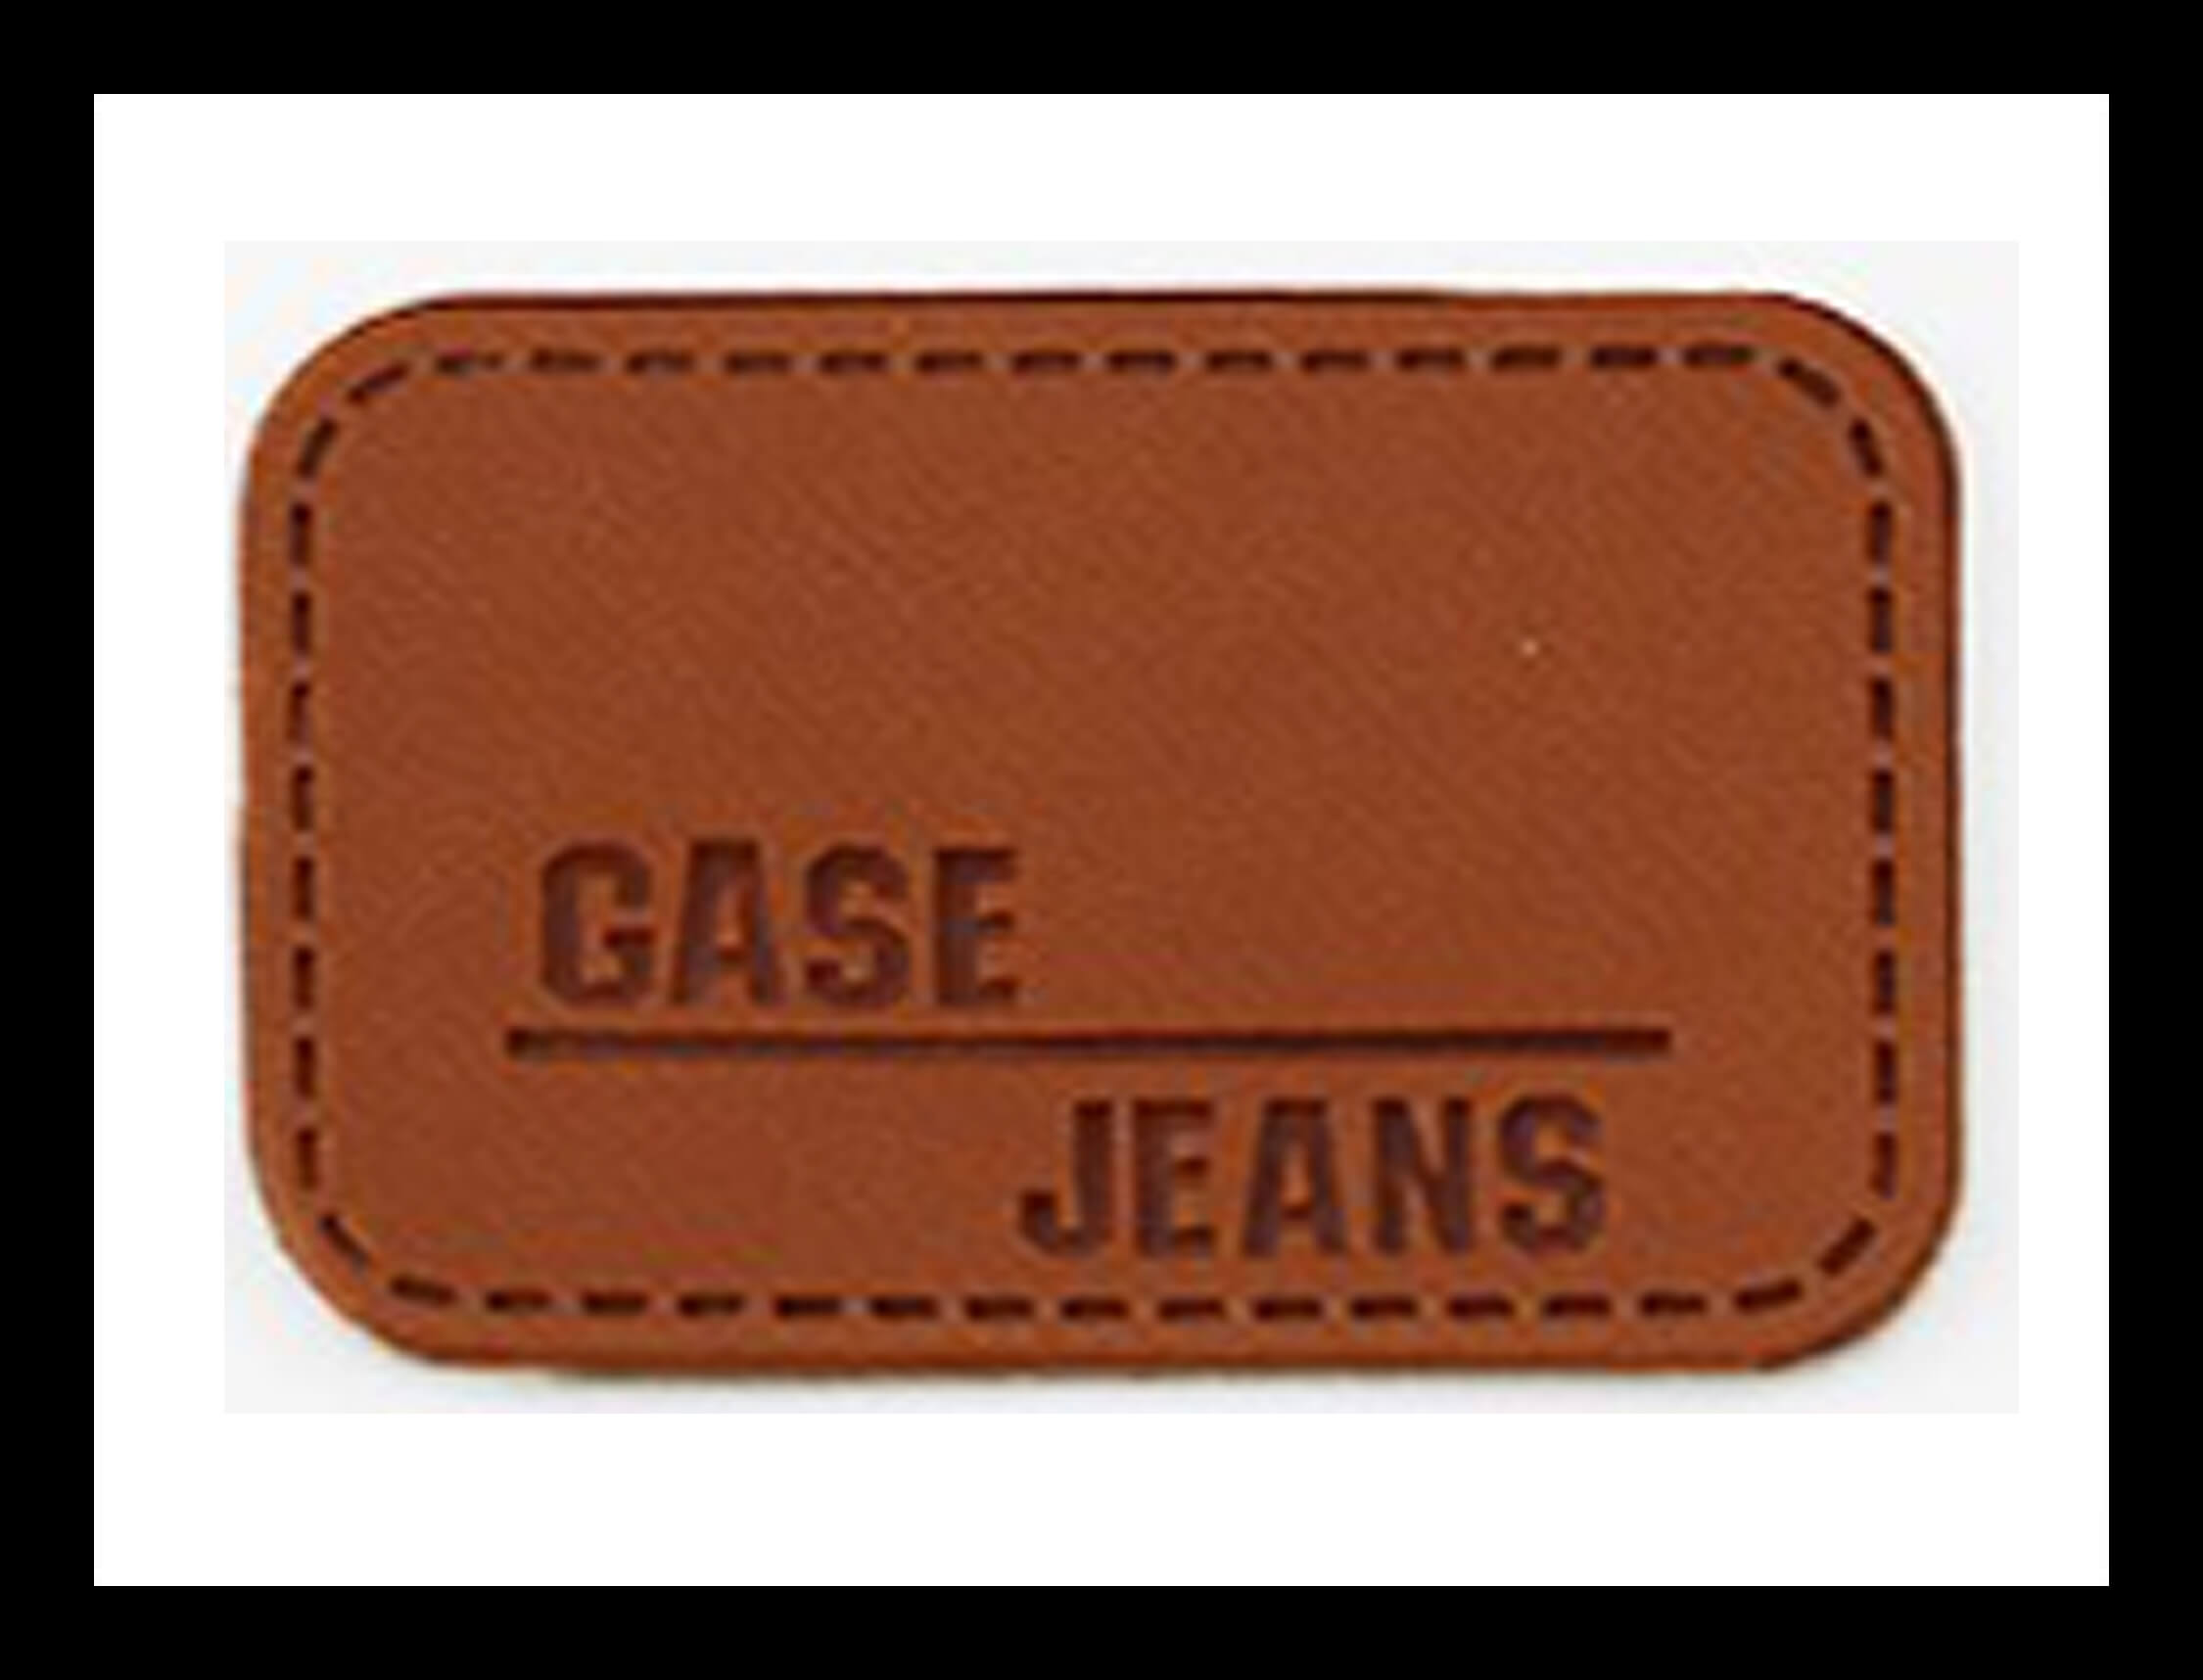 quality leather patches